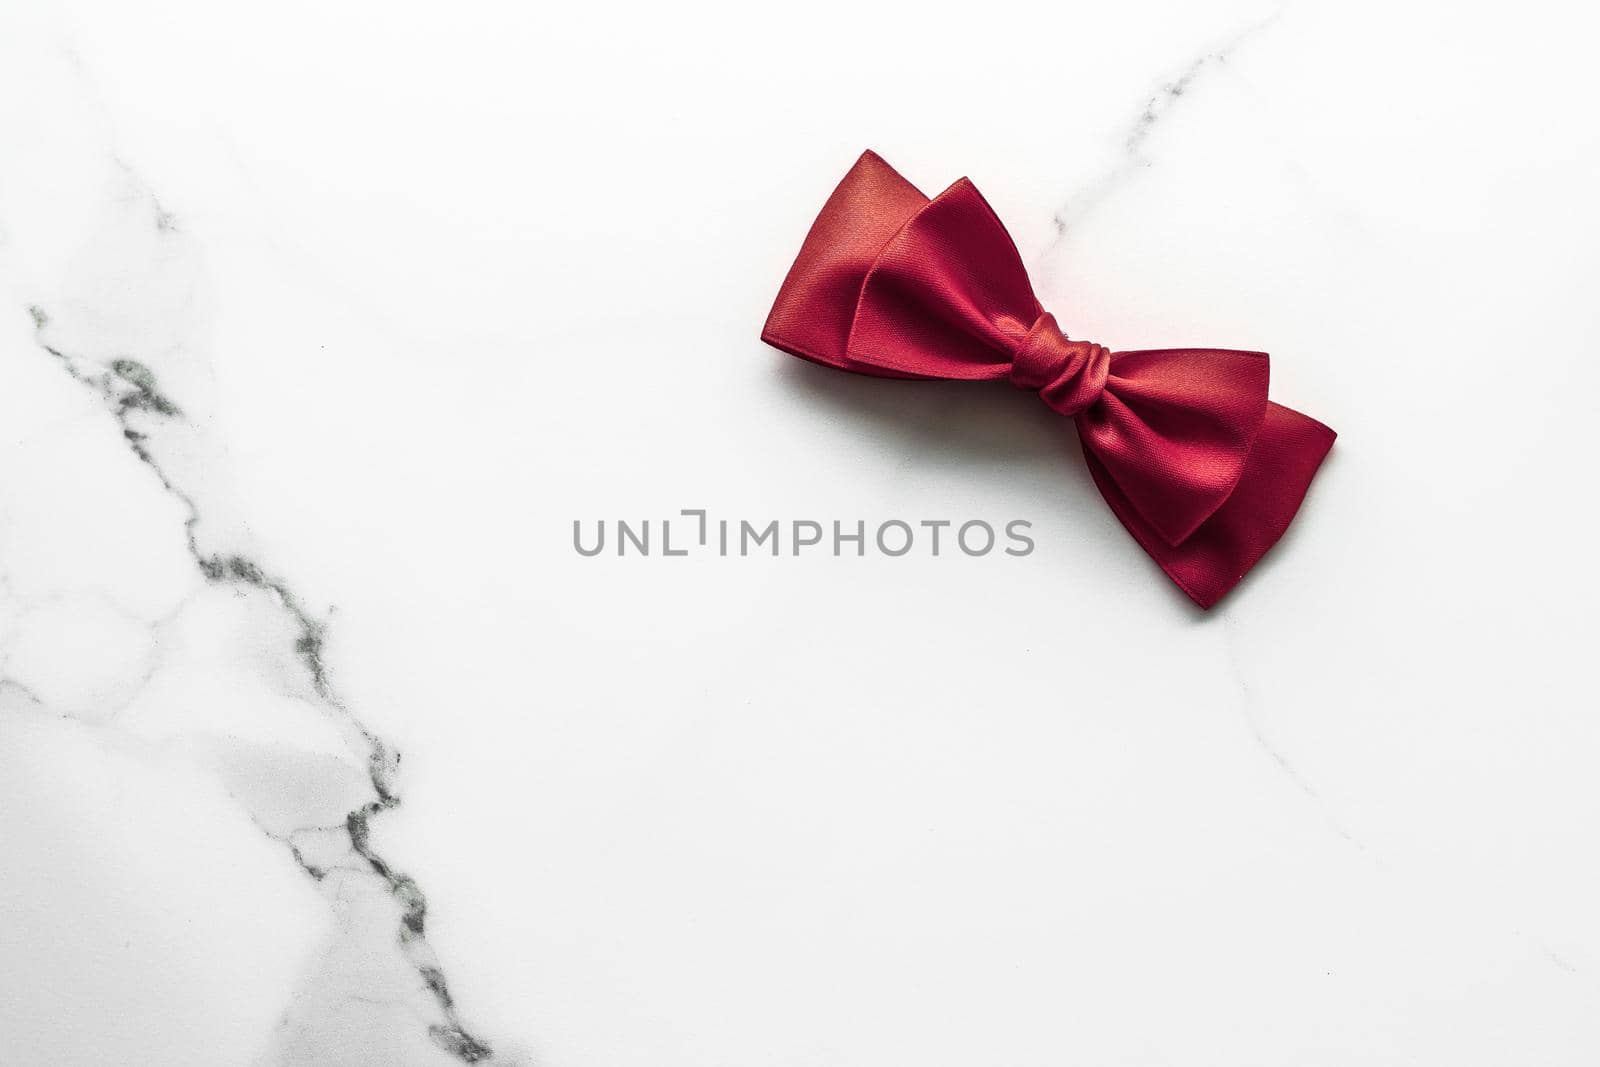 Holiday gift, decoration and sale promotion concept - Bordeaux silk ribbon on marble background, flatlay